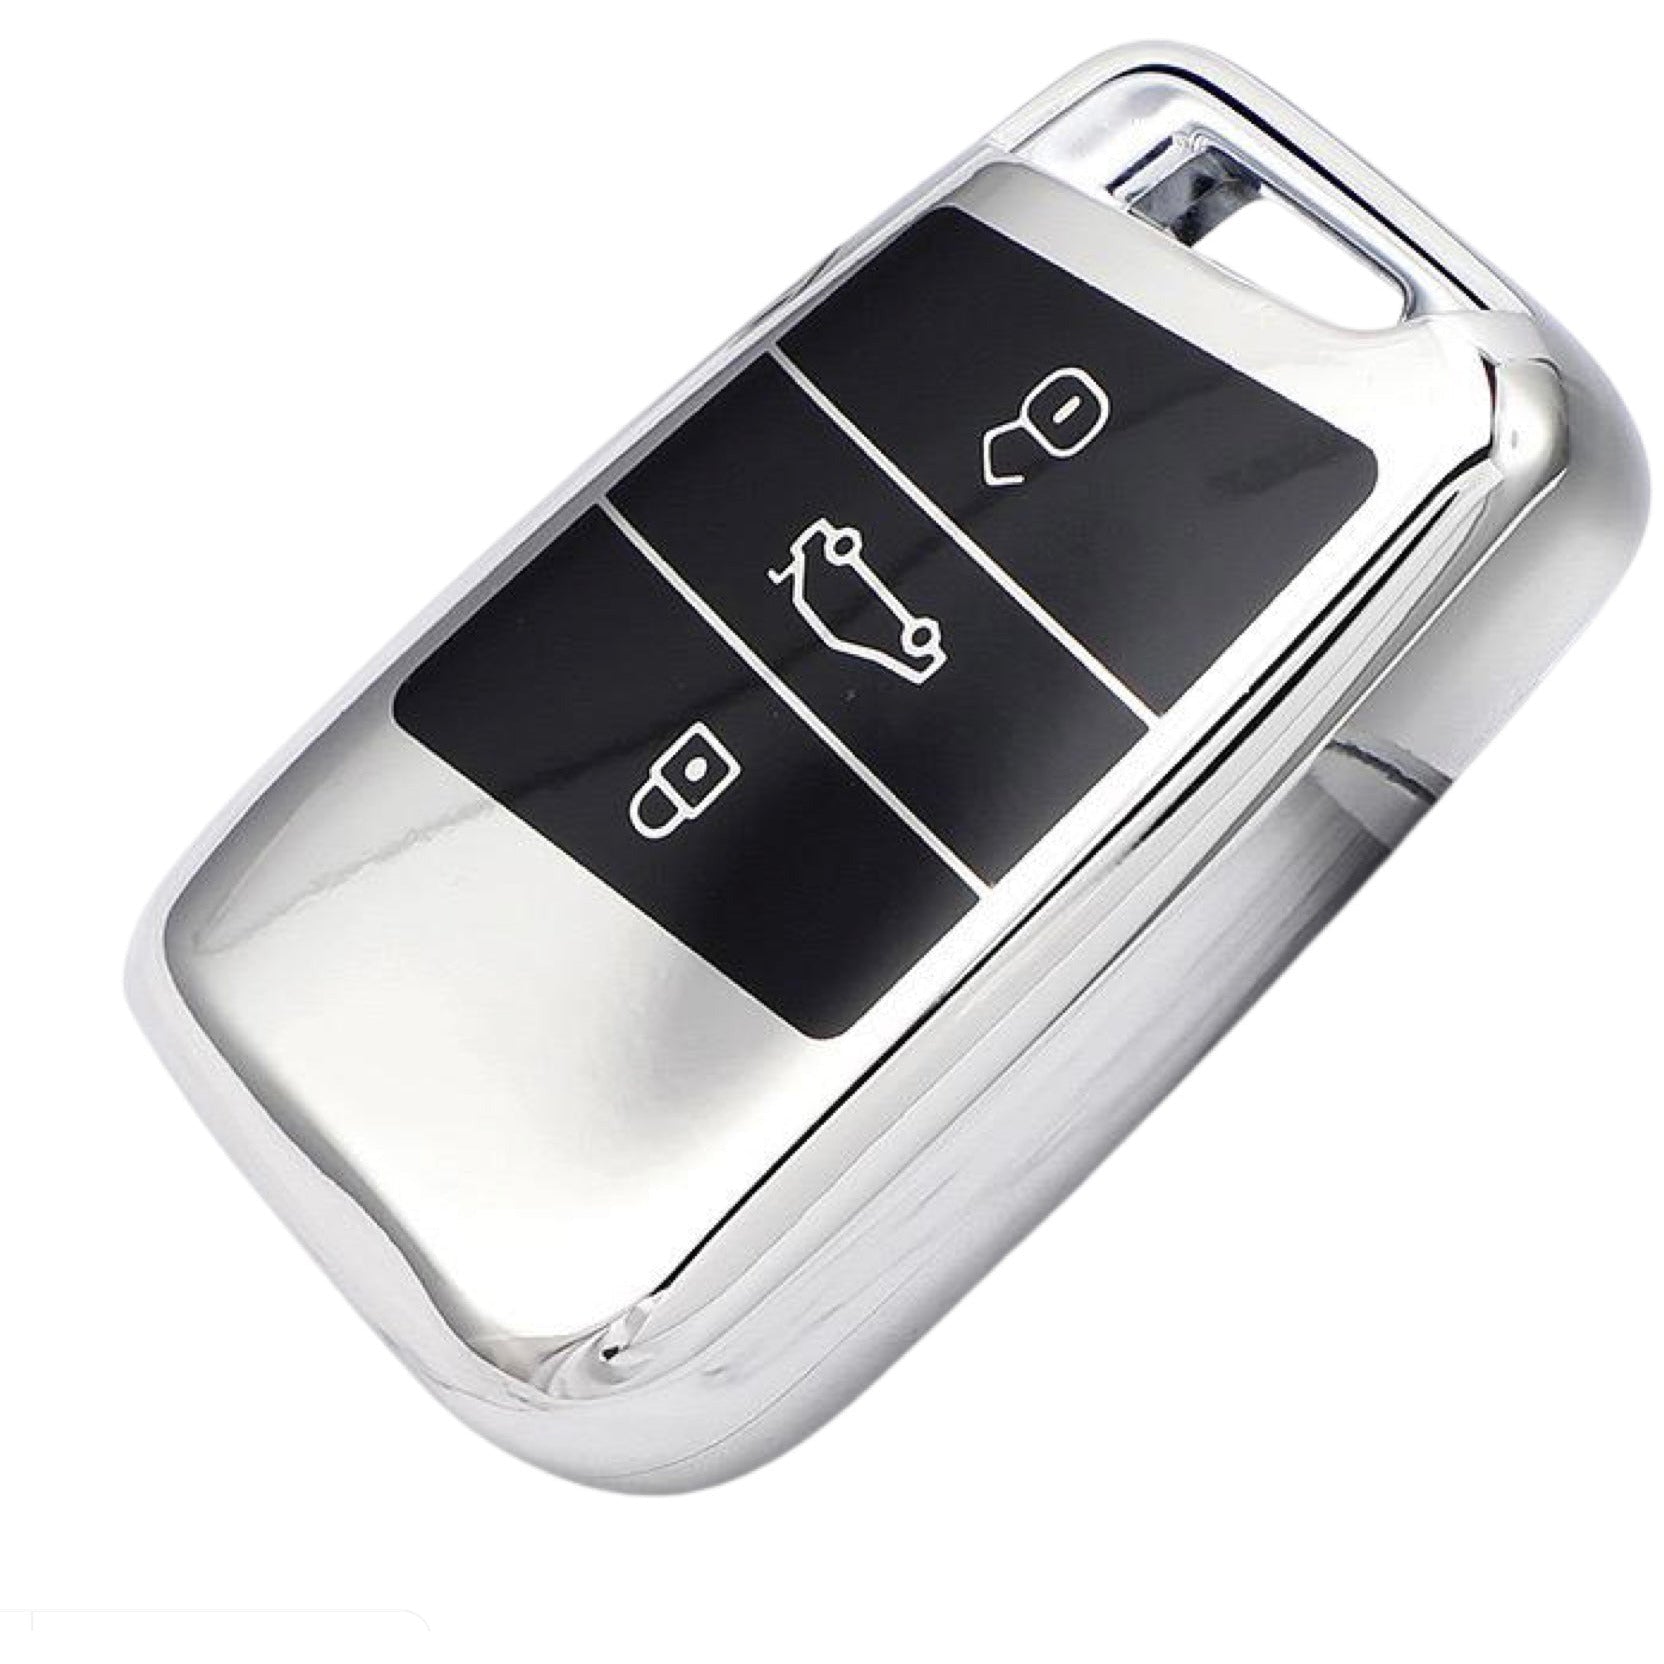 Volkswagen car key cover silver | Key fob cover for VW Golf, Passat, Arteon | Volkswagen Accessories - Keysleeves